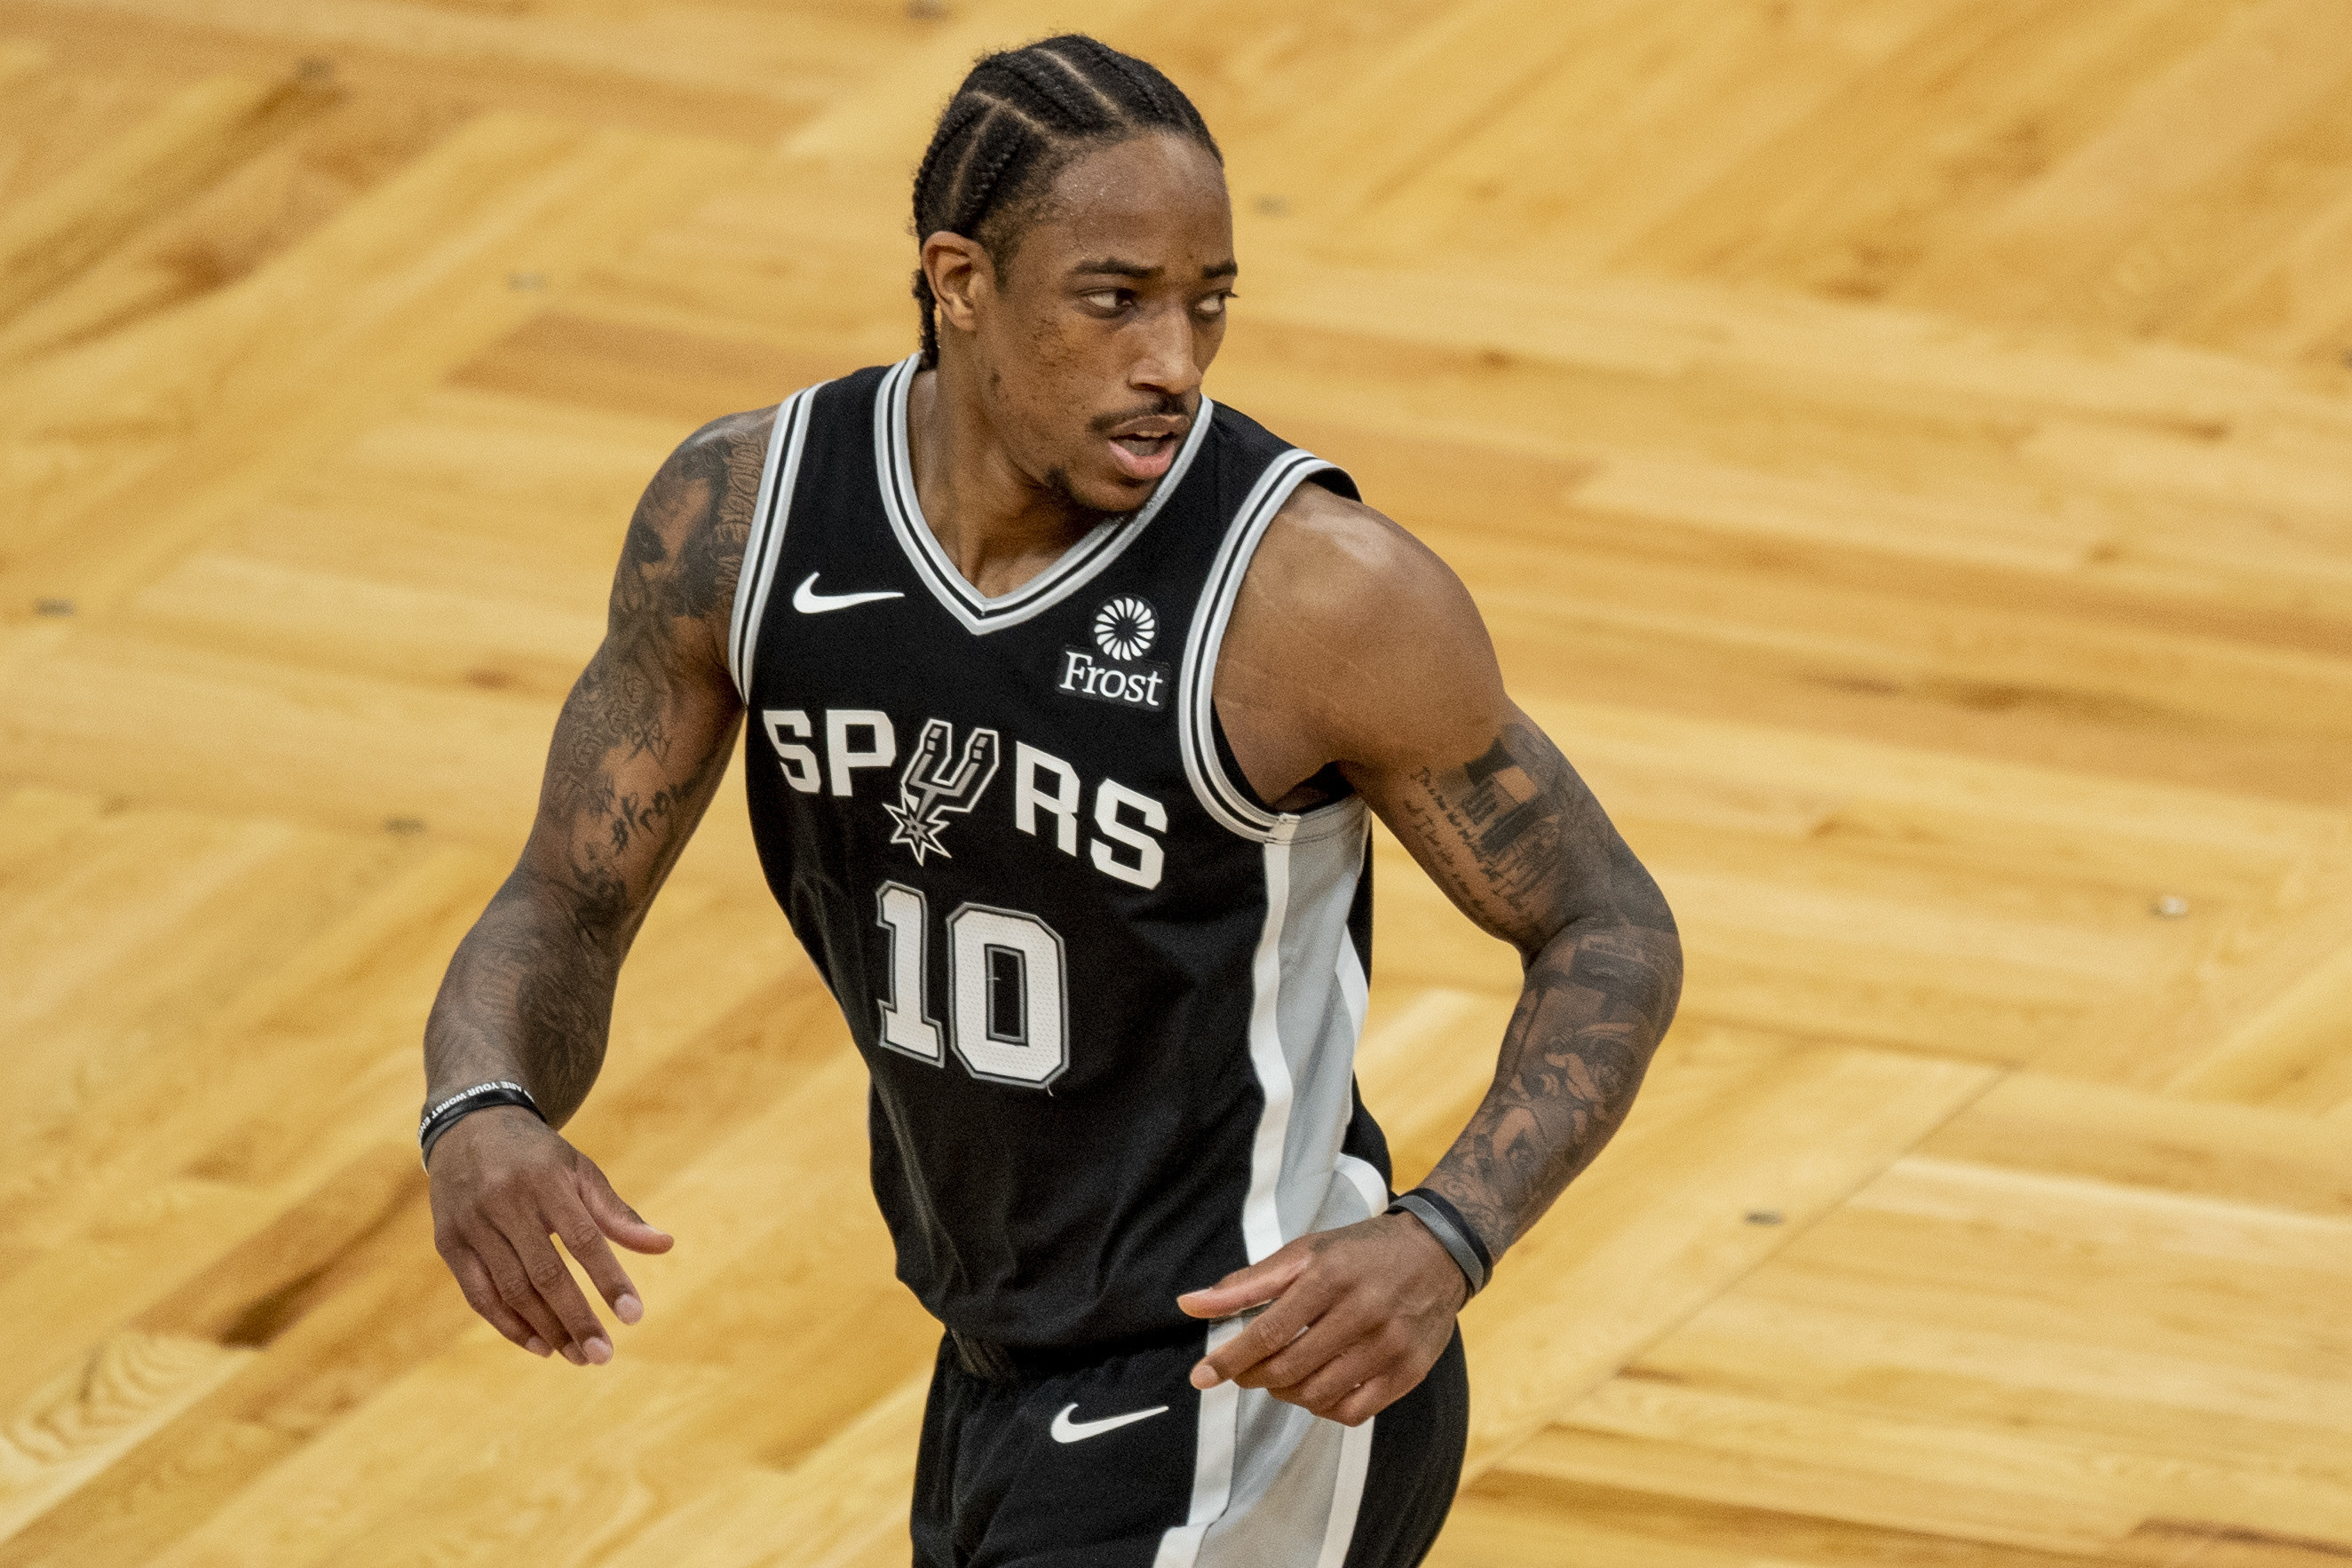 Black Spurs jersey with white numbers and lettering